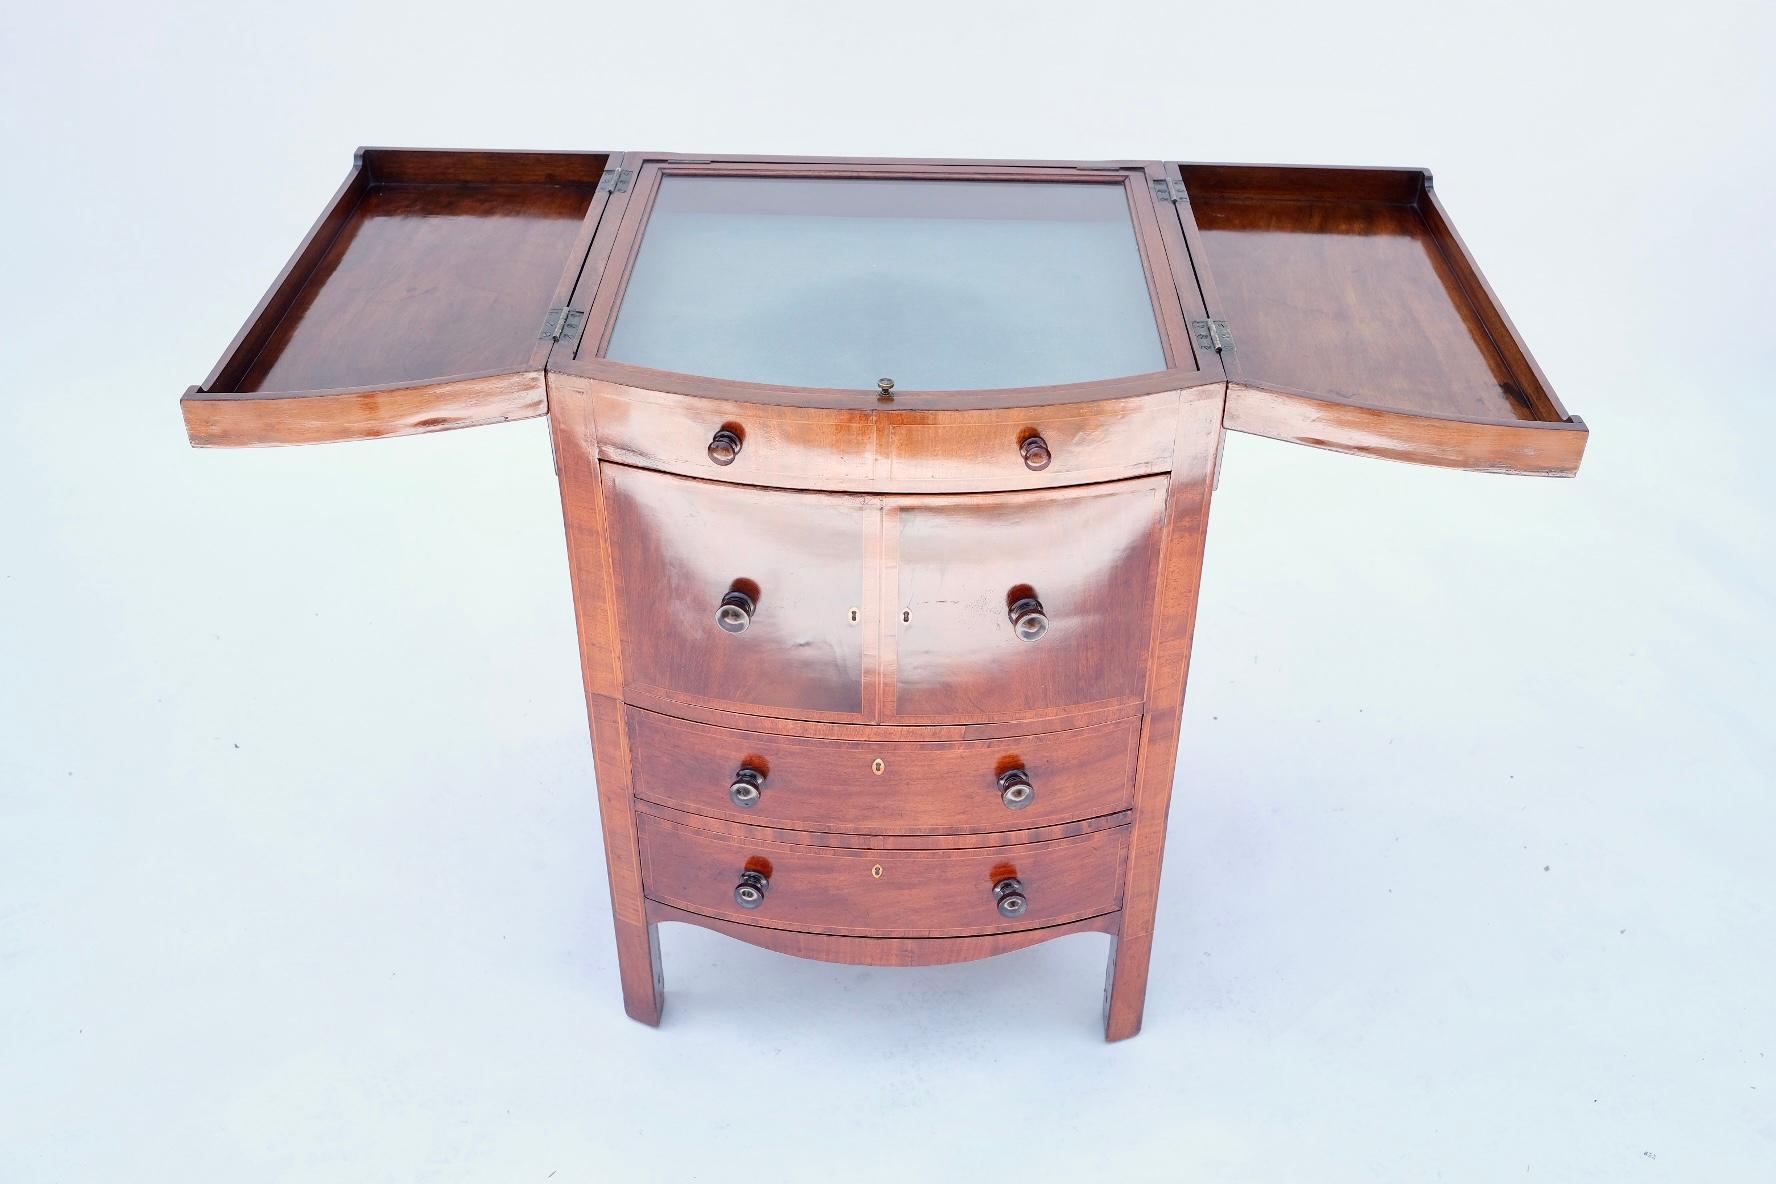 19th century. English. Mahogany. Chest opens up into a vanity. Glass top allows viewing of gentleman's accessories. Operable drawers for storage. Excellent condition. With the chest opened, the full width is 45 inches. Closed width is 22 1/4 inches.